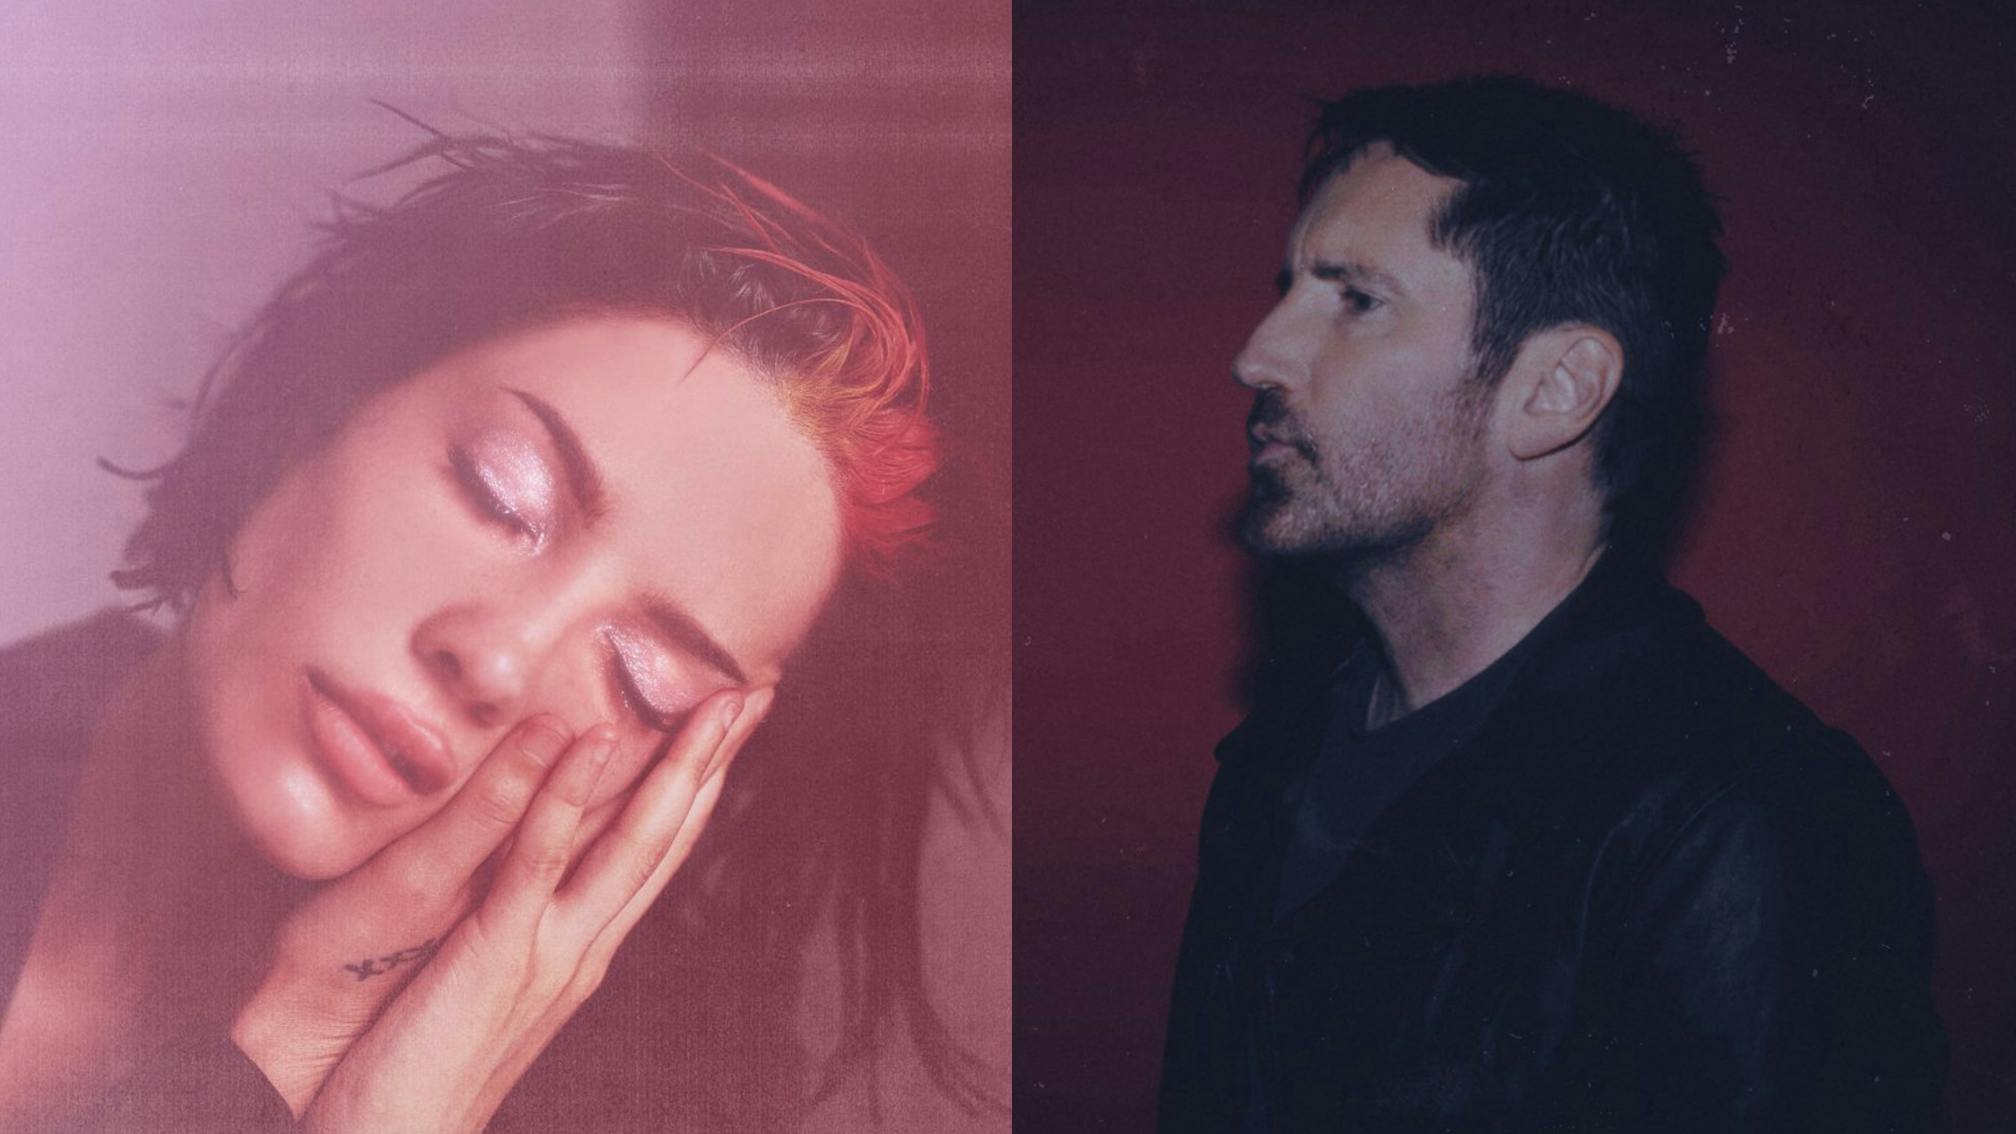 The release date and artwork for Halsey's new Nine Inch Nails-produced album is coming this week